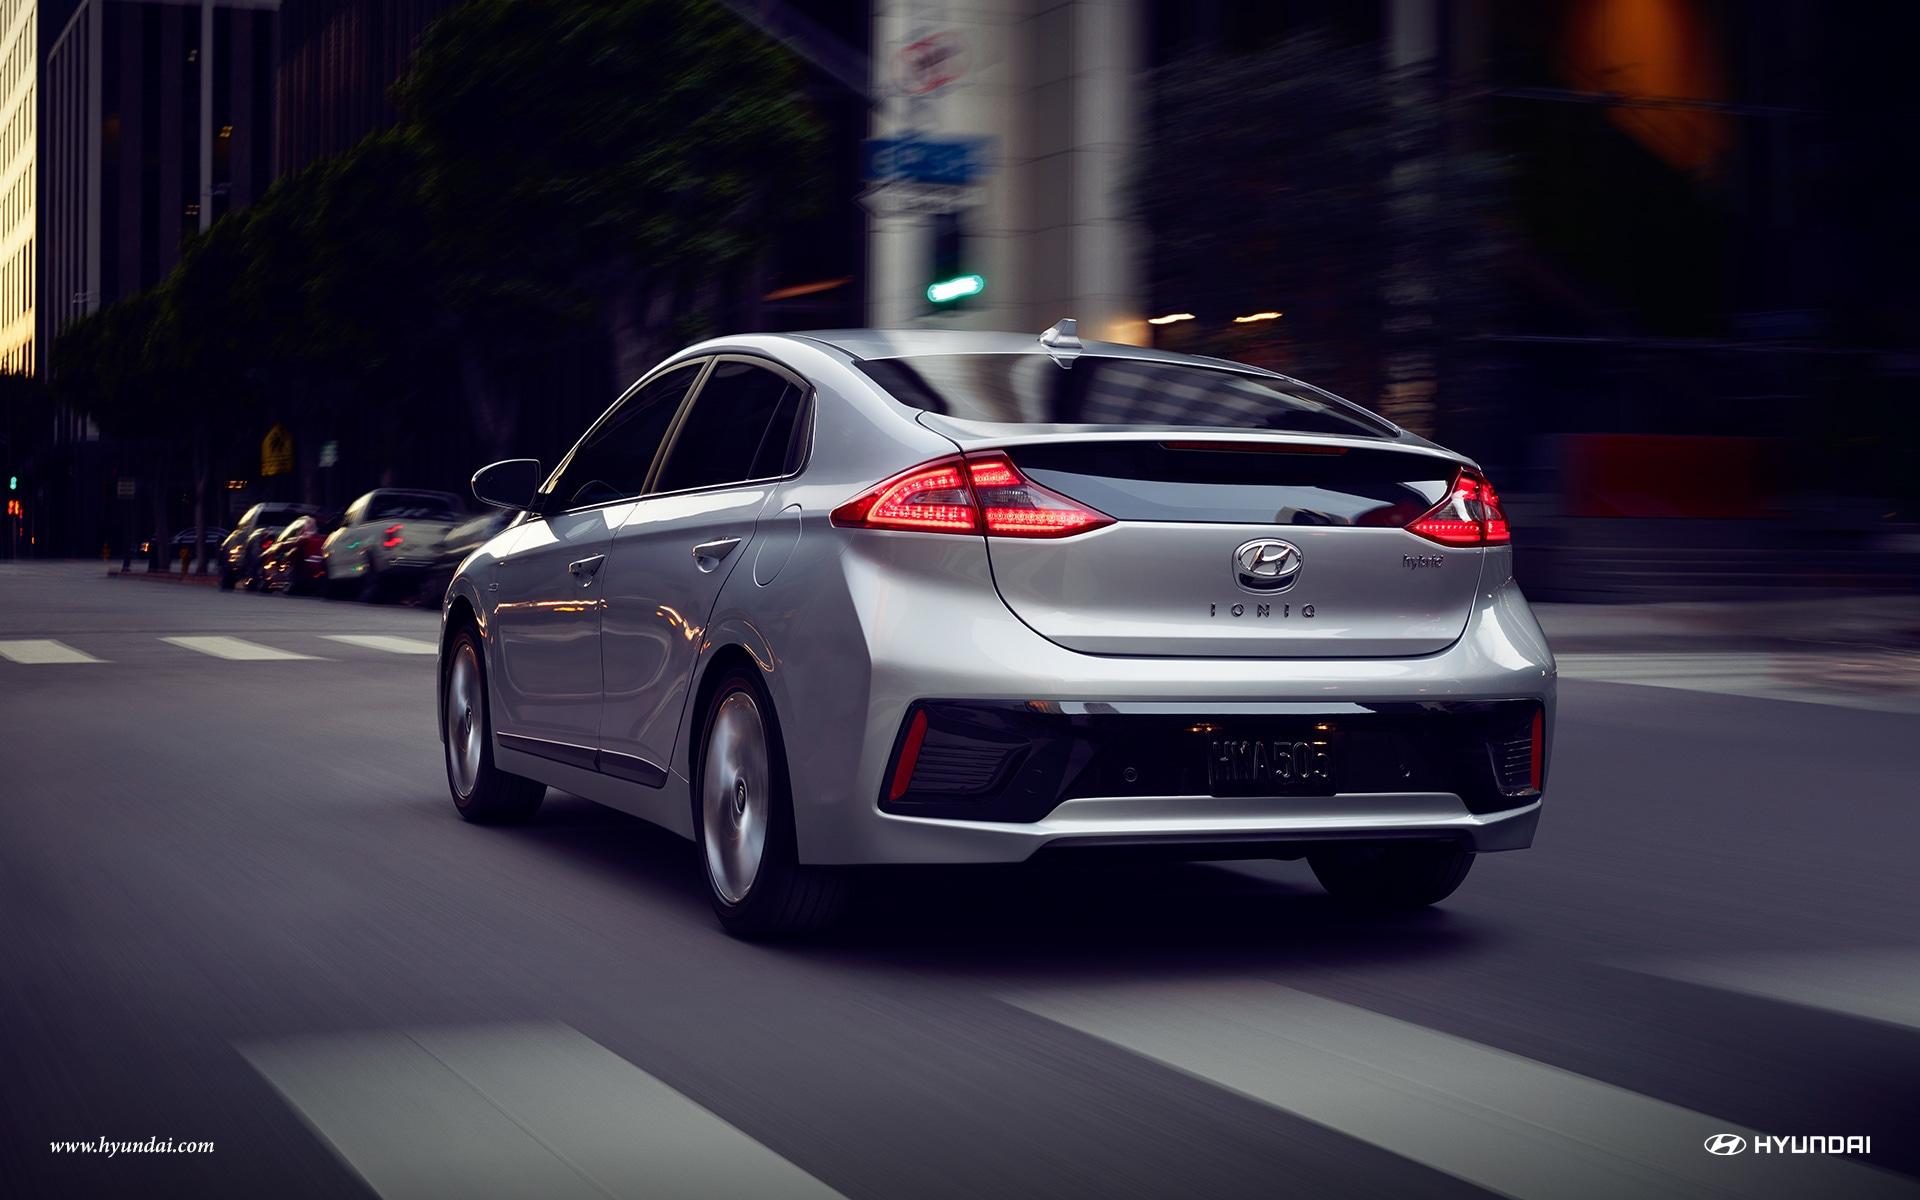 New Hyundai Ioniq for sale near Catonsville MD, Owings Mills MD